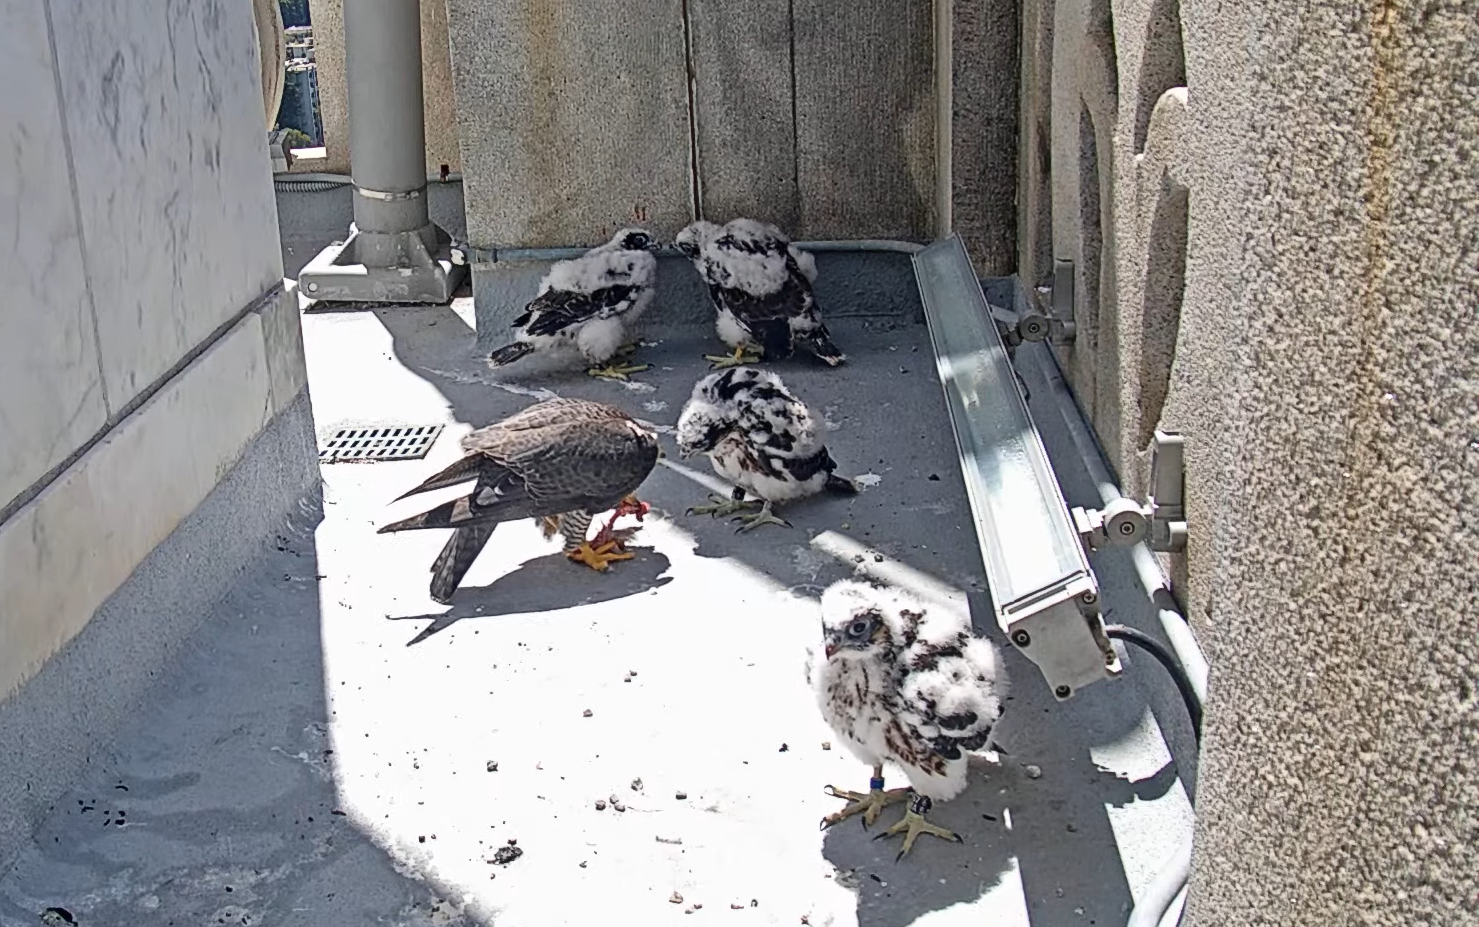 Annie (left) feeds Eclipse, Aurora (back left) and Sol touch beaks, and Knox, fed, is in the front.